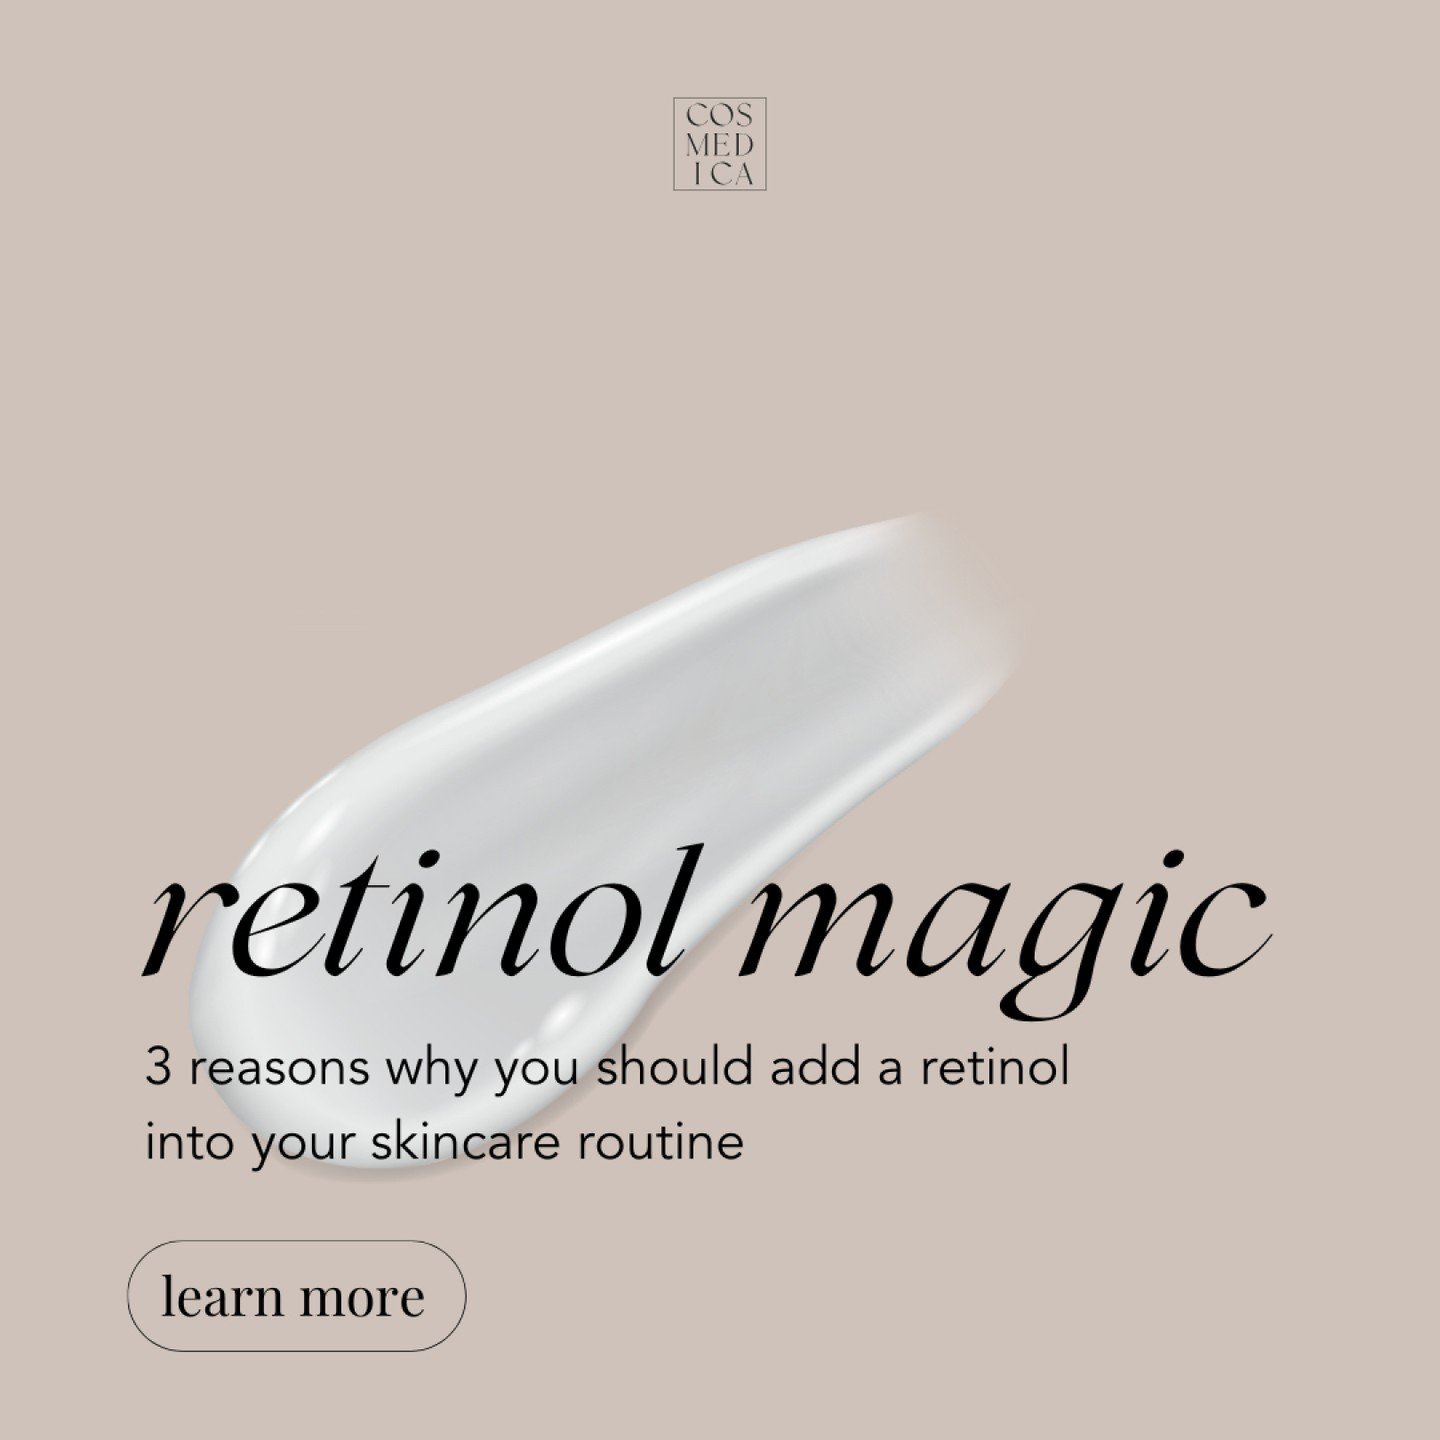 3 MAJOR reasons why you should add Retinol into your skincare routine!

1. Eliminate and minimize signs of aging - lines, wrinkles and texture
2. Brightens skin and evens out tone
3. Minimizes pores and decreases acne and acne scarring.

Everyone can